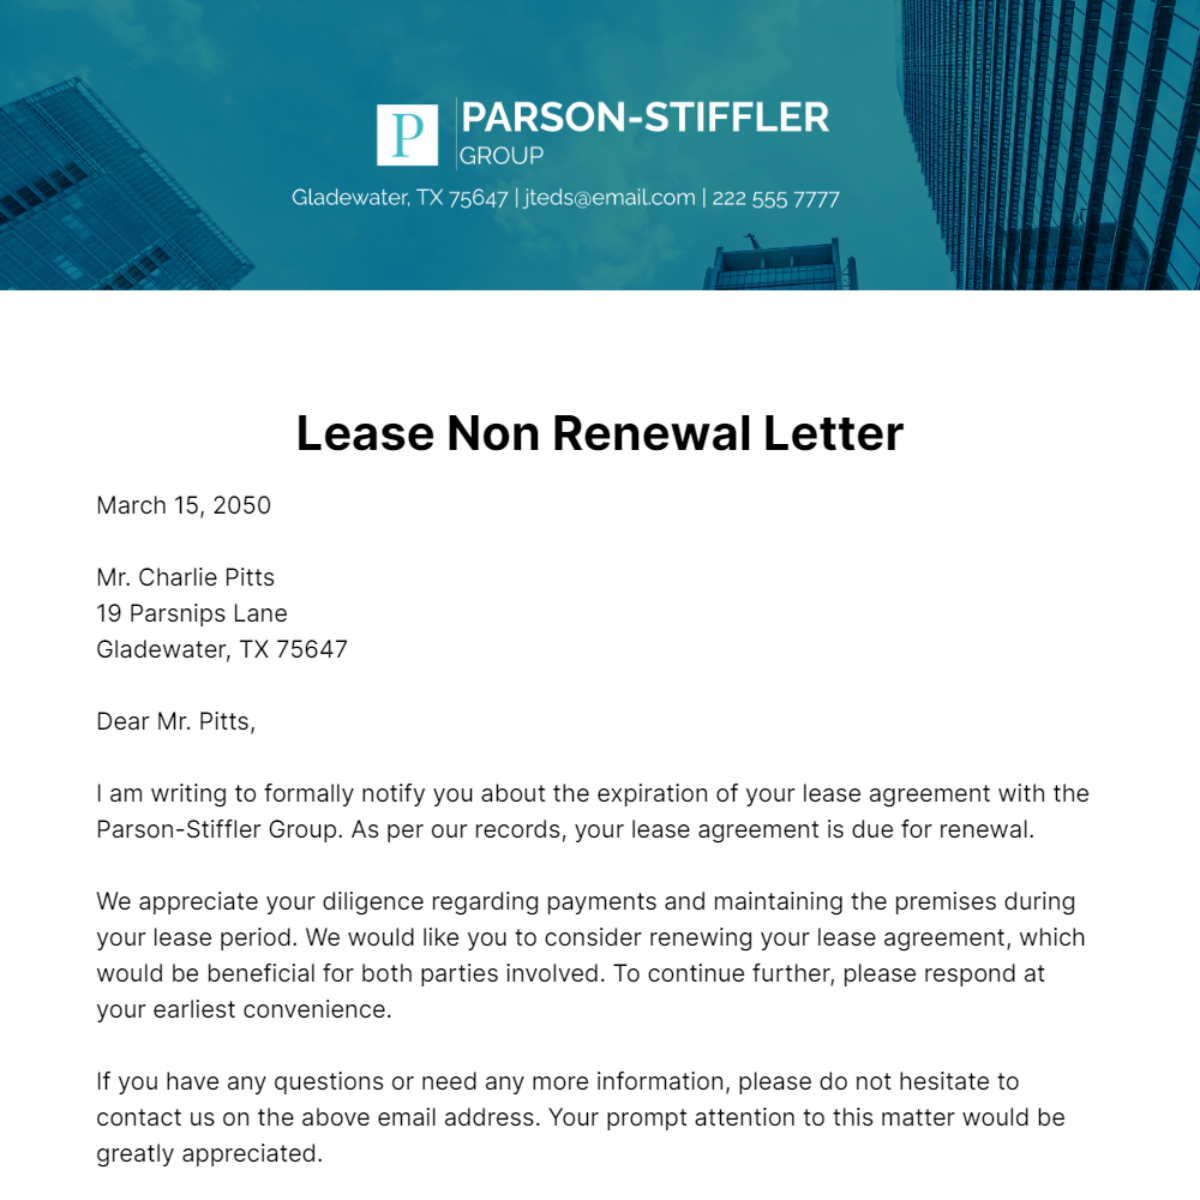 Lease Non Renewal Letter   Template